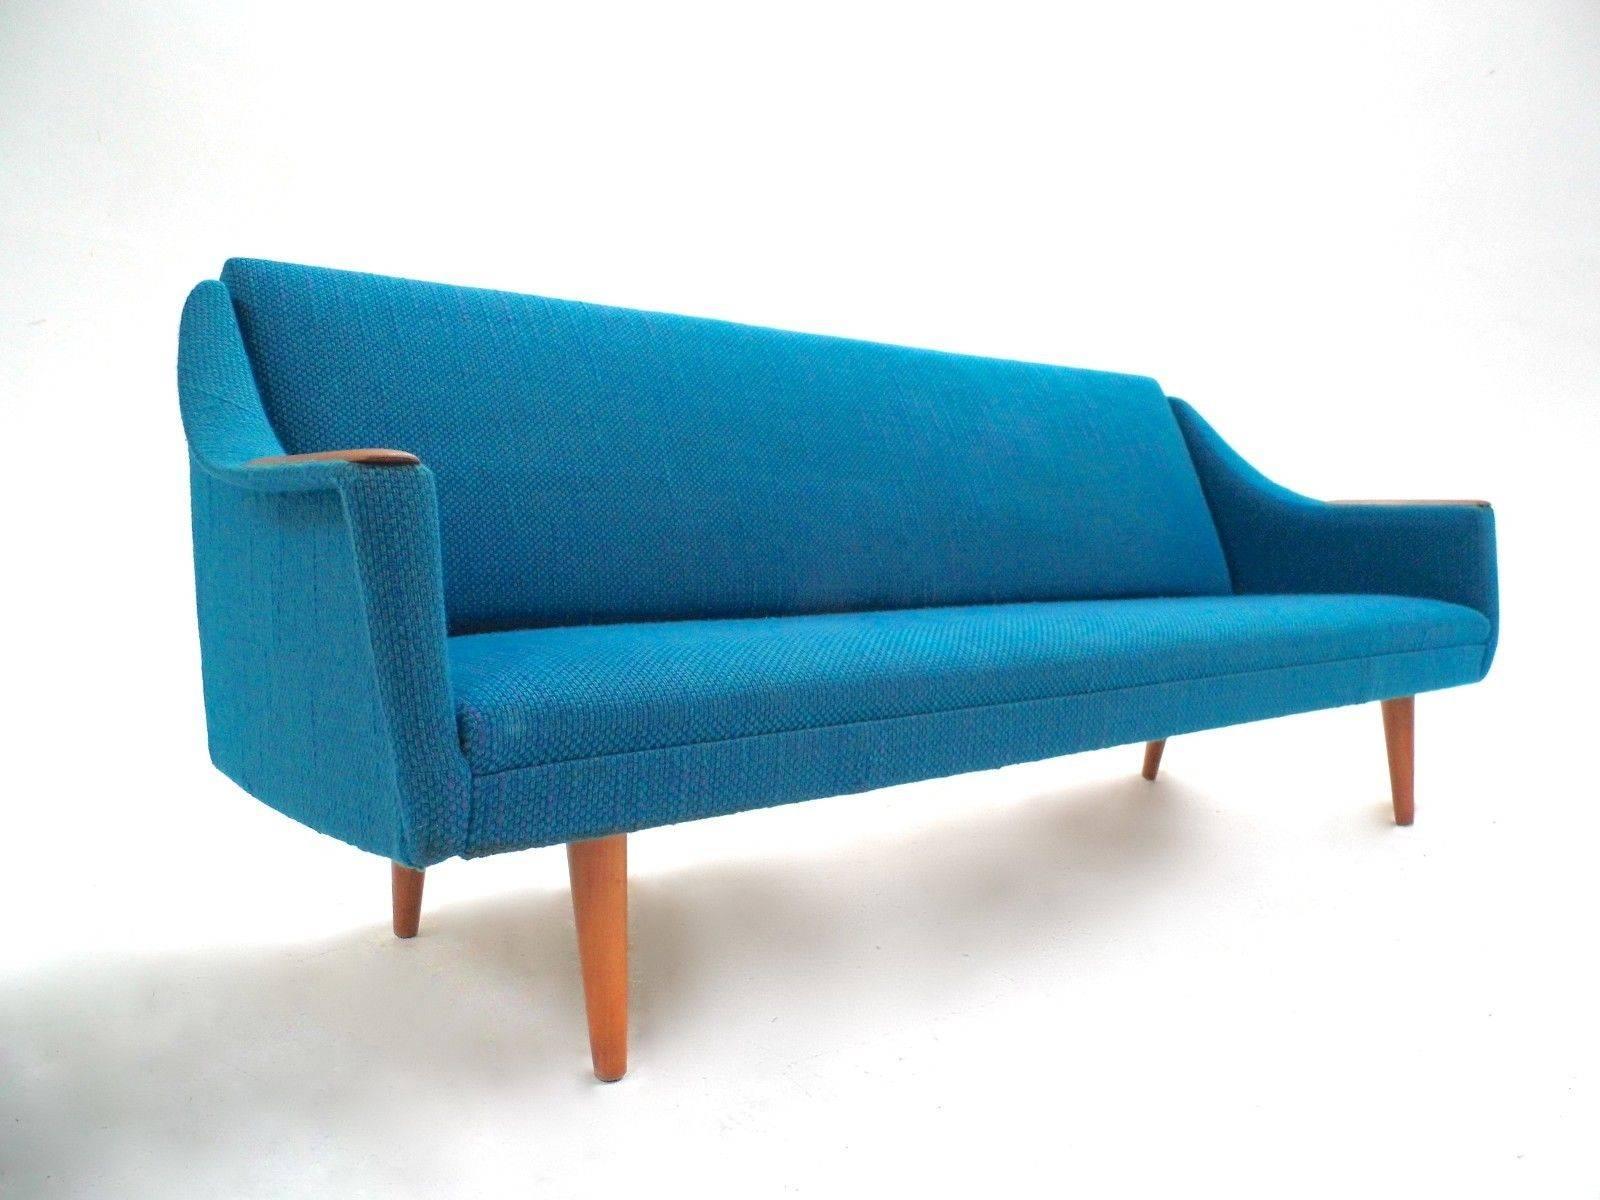 A beautiful Norwegian turquoise blue wool four-seat double sofa bed, this would make a stylish addition to any living or bedroom area. The sofa pulls out into a comfortable sprung double bed. A striking piece of classically designed Scandinavian